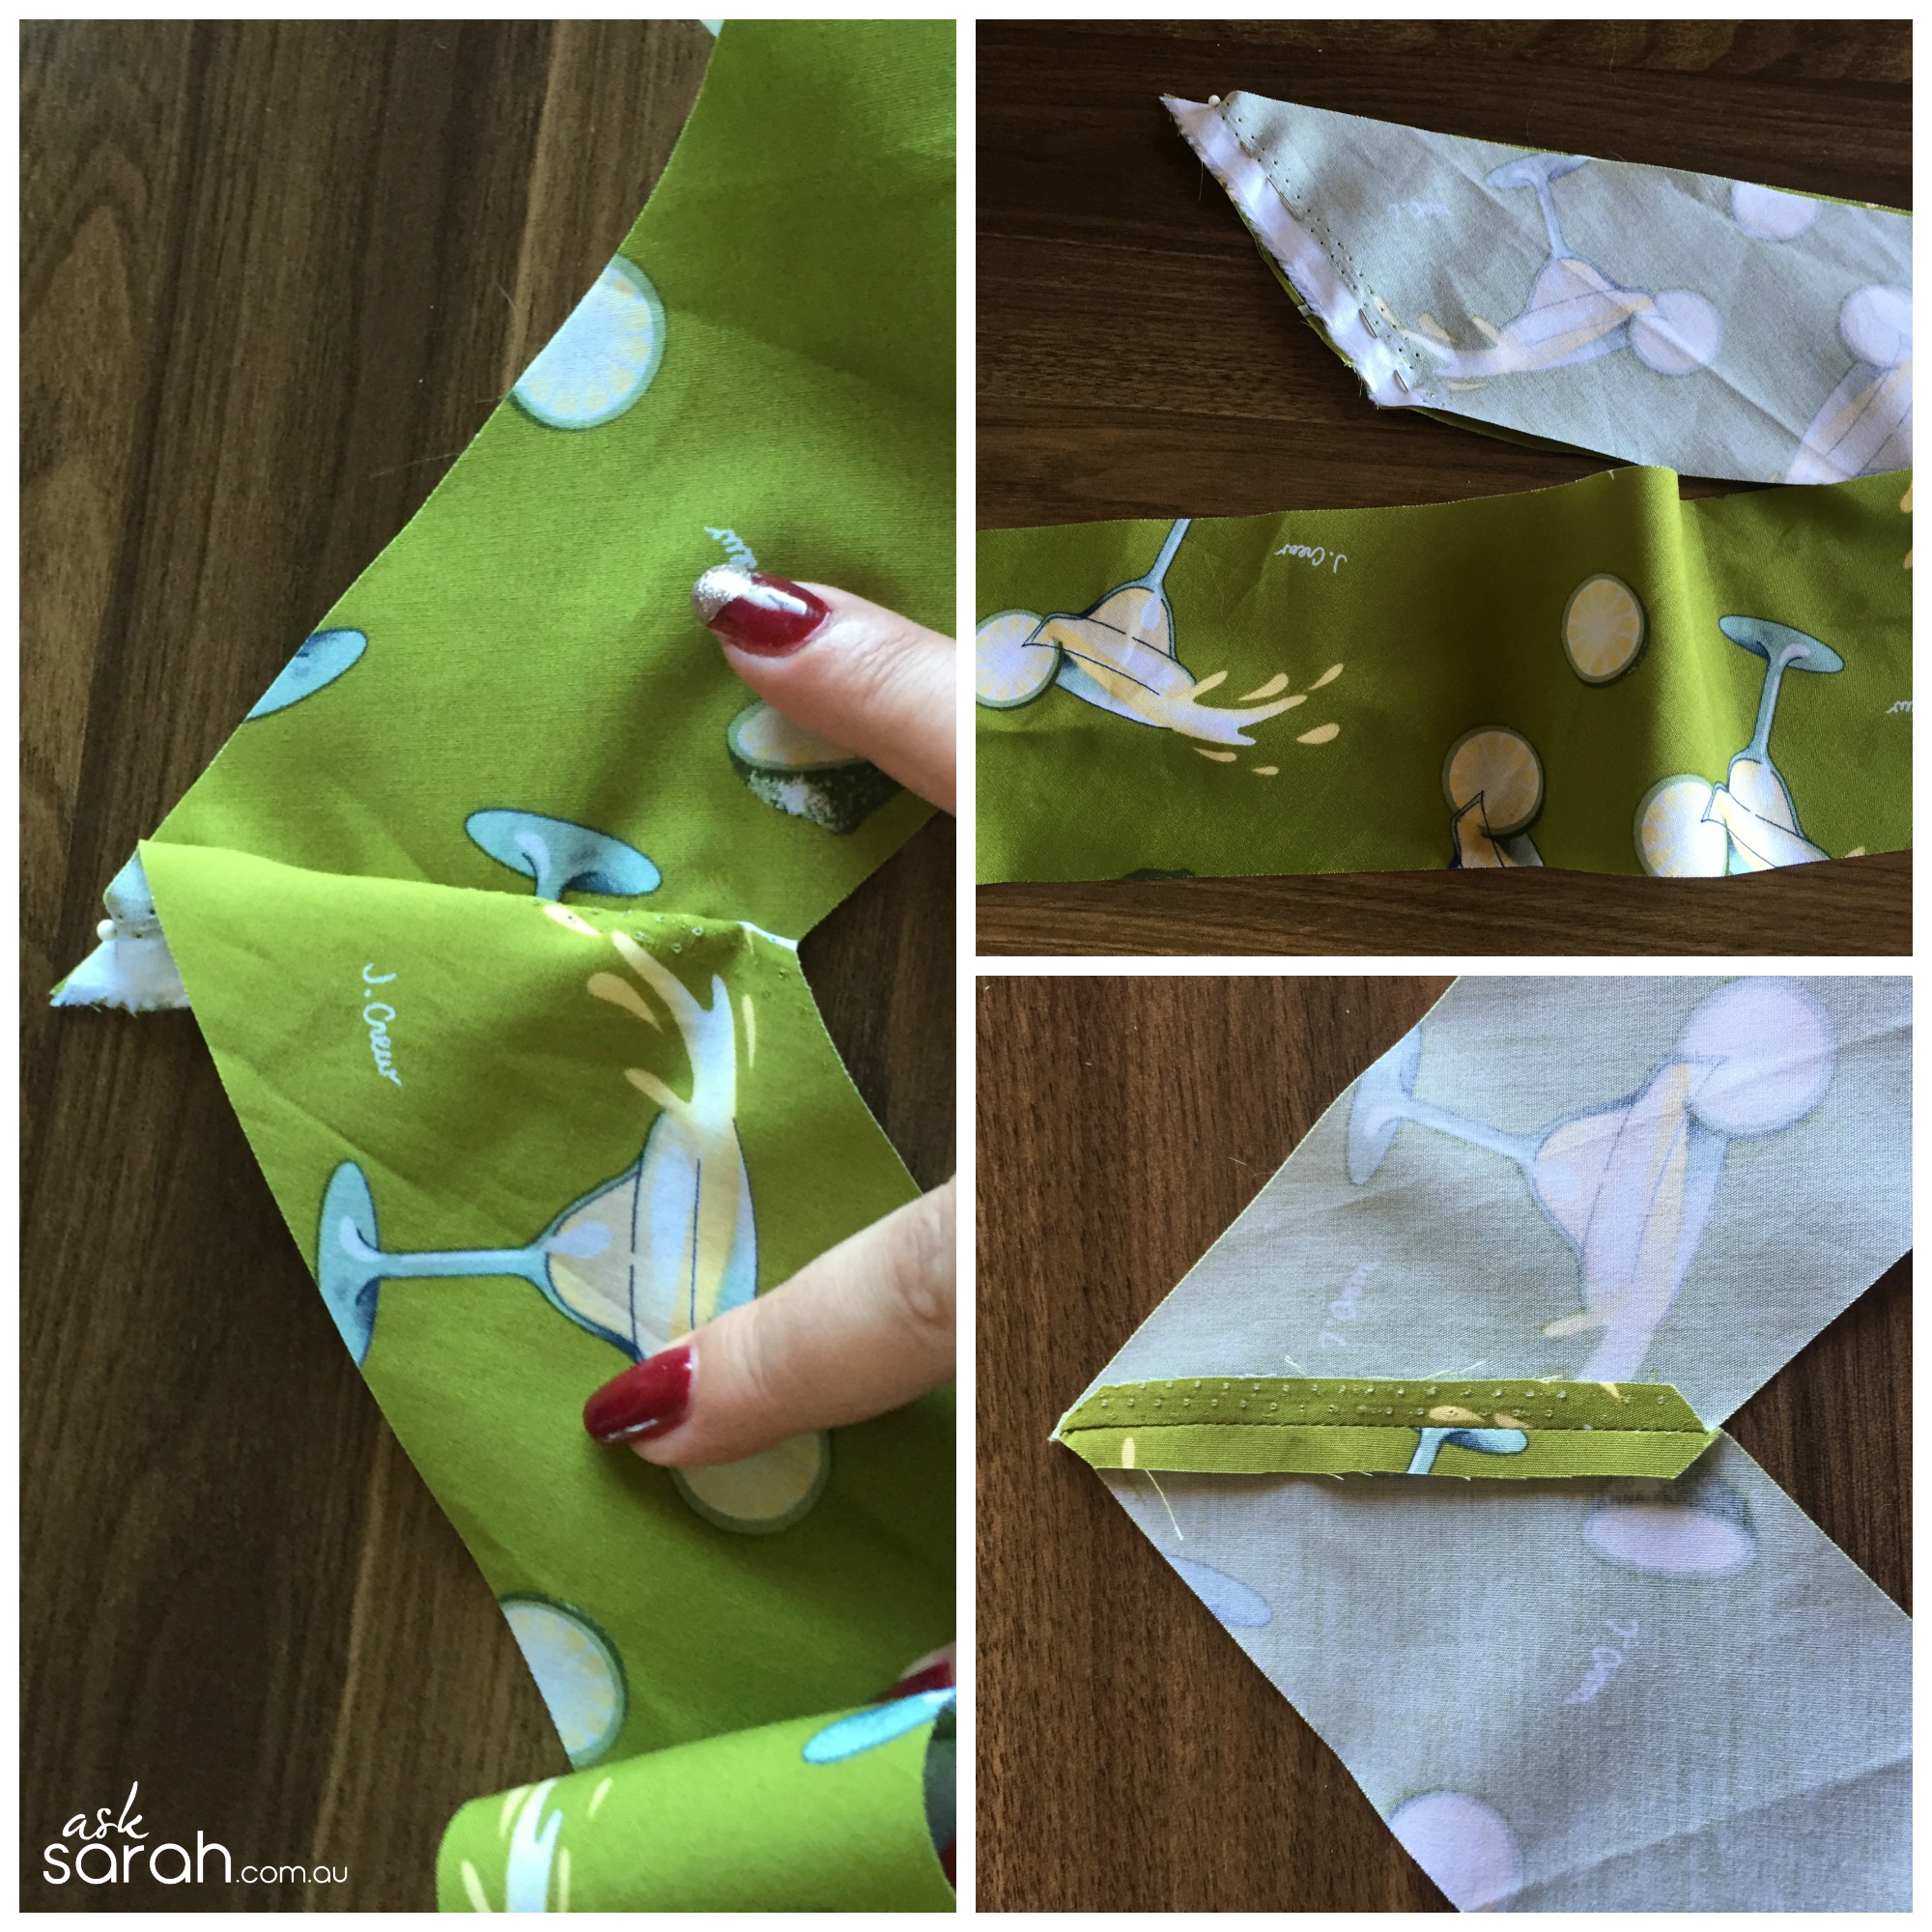 Sew: Removable Retro Décolleté Collar & Halter Strap Tutorial {Turn A Sweetheart Top Into 50's Style Top And Back Again}